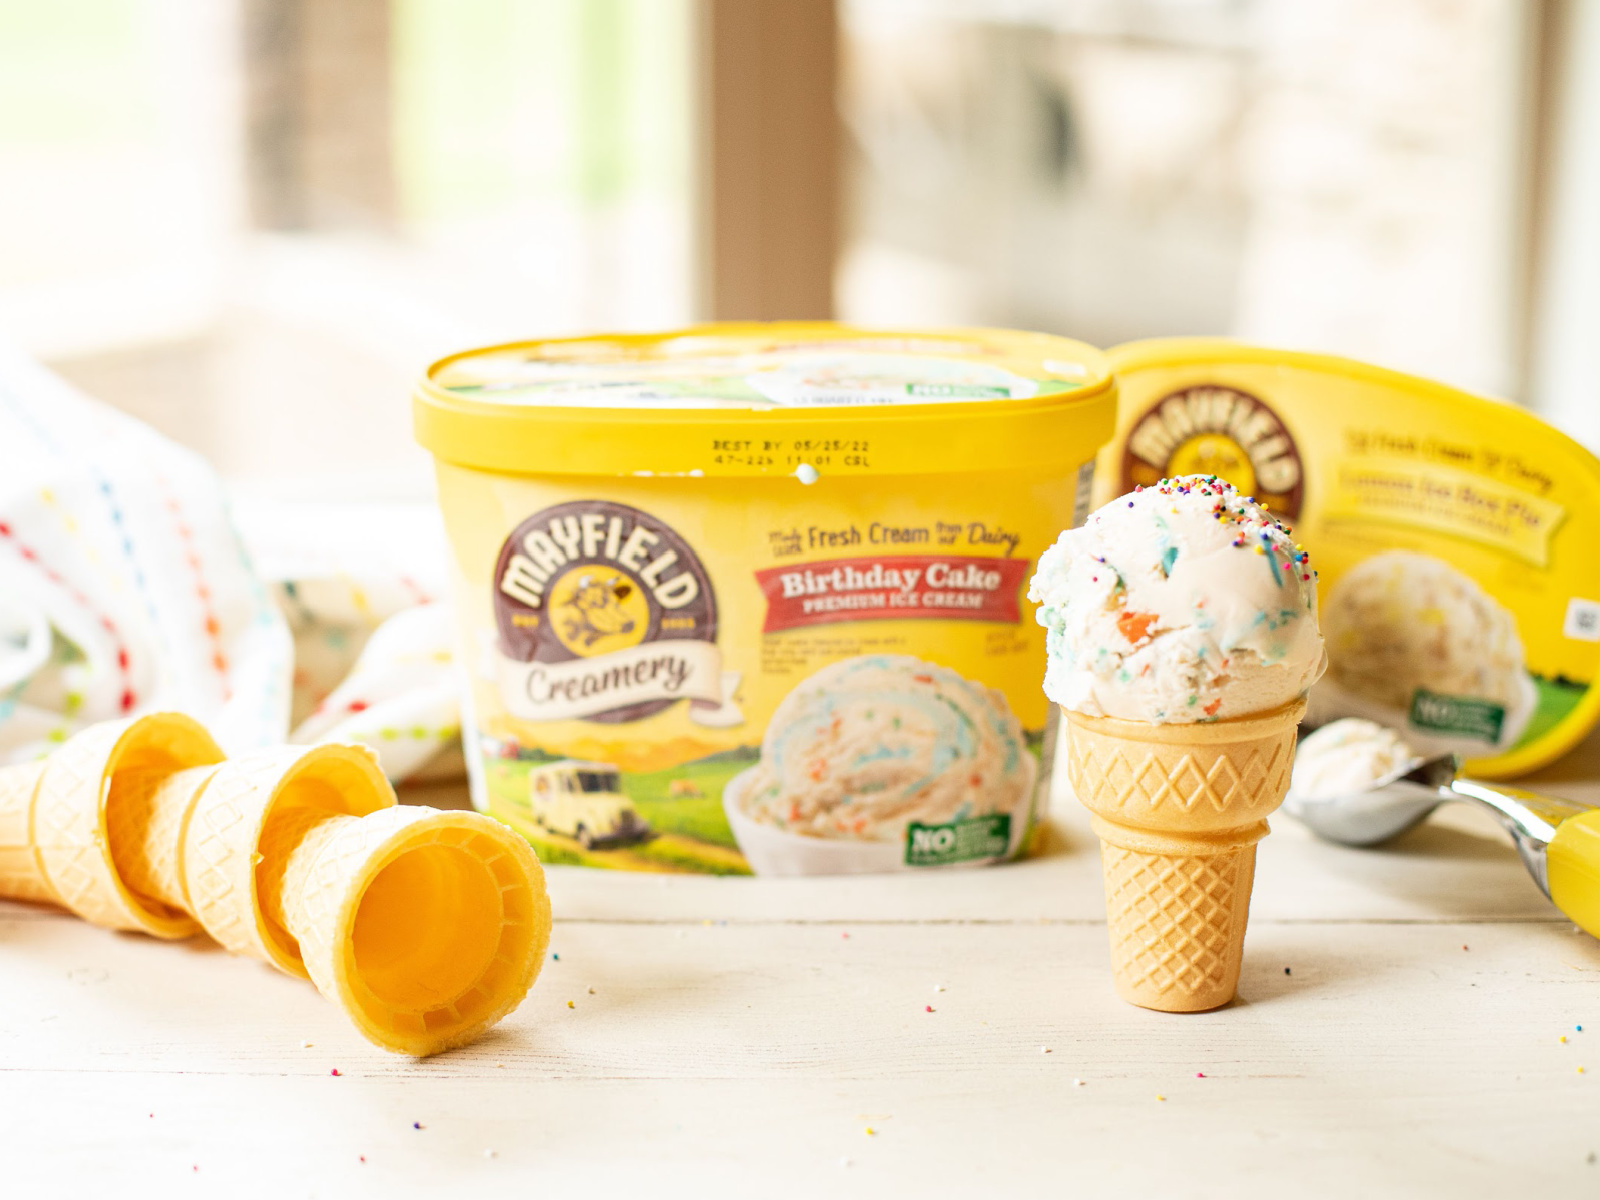 Find Your Favorite Mayfield Ice Cream At Publix – Grab What’s Good!